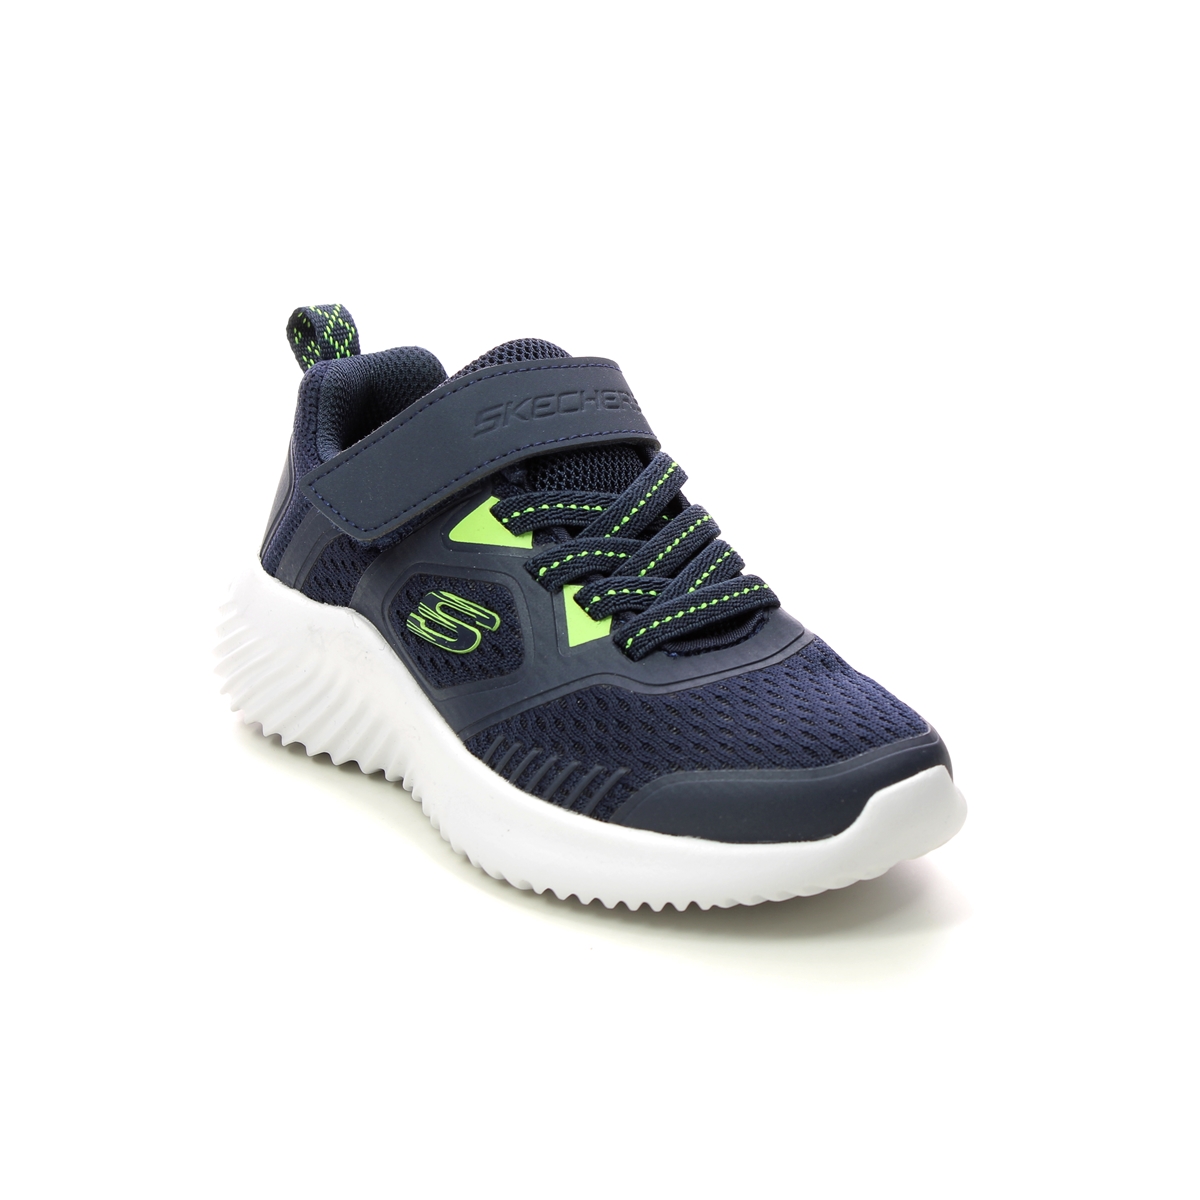 Skechers Bounder Navy Lime Kids Trainers 403736L In Size 30 In Plain Navy Lime For kids